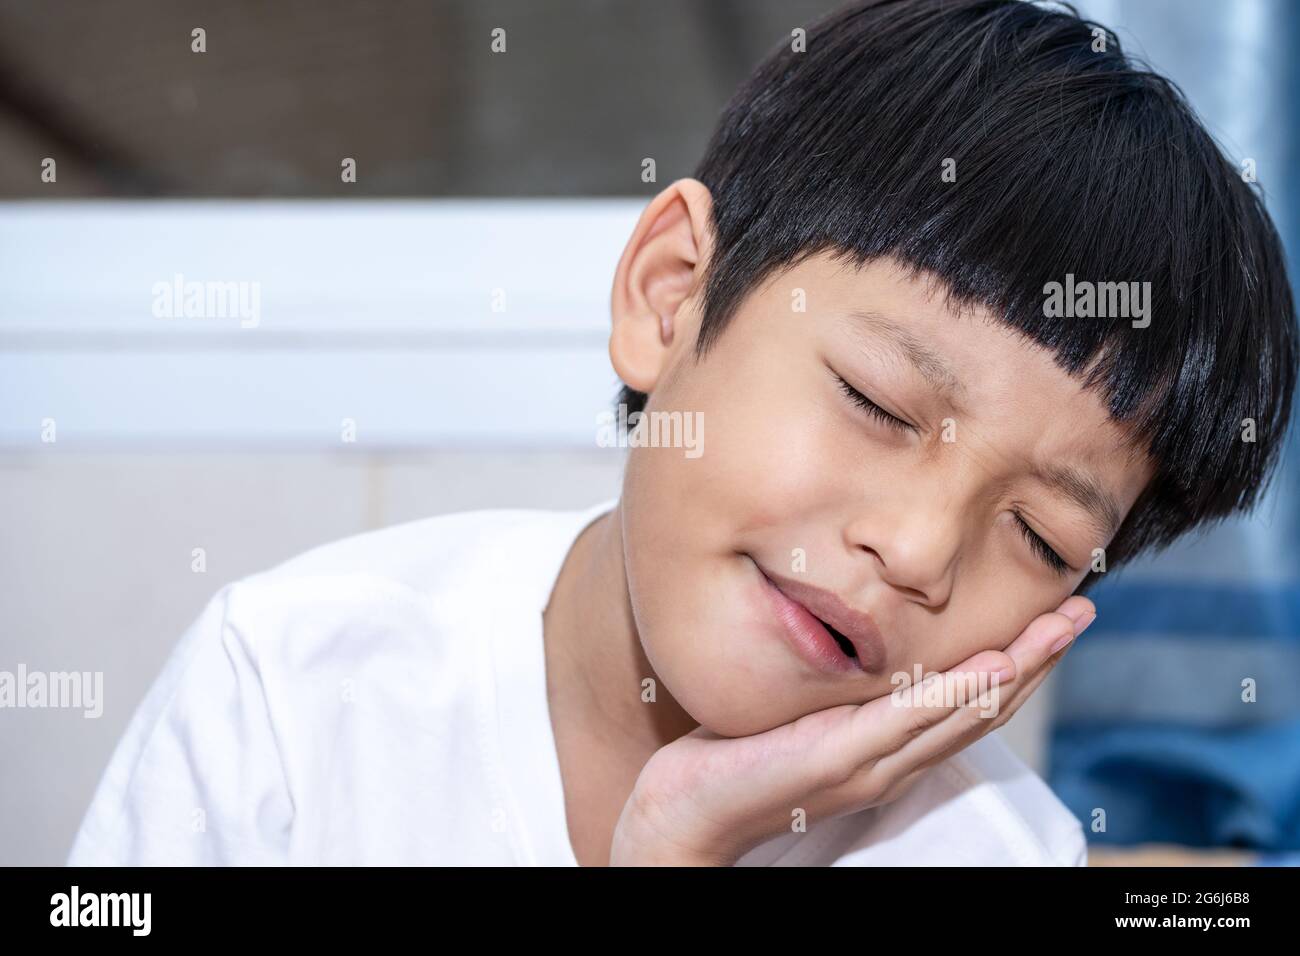 Asian little boy is doing a terrible toothache. Portrait a little boy suffering from toothache. Oral Care Concepts Stock Photo